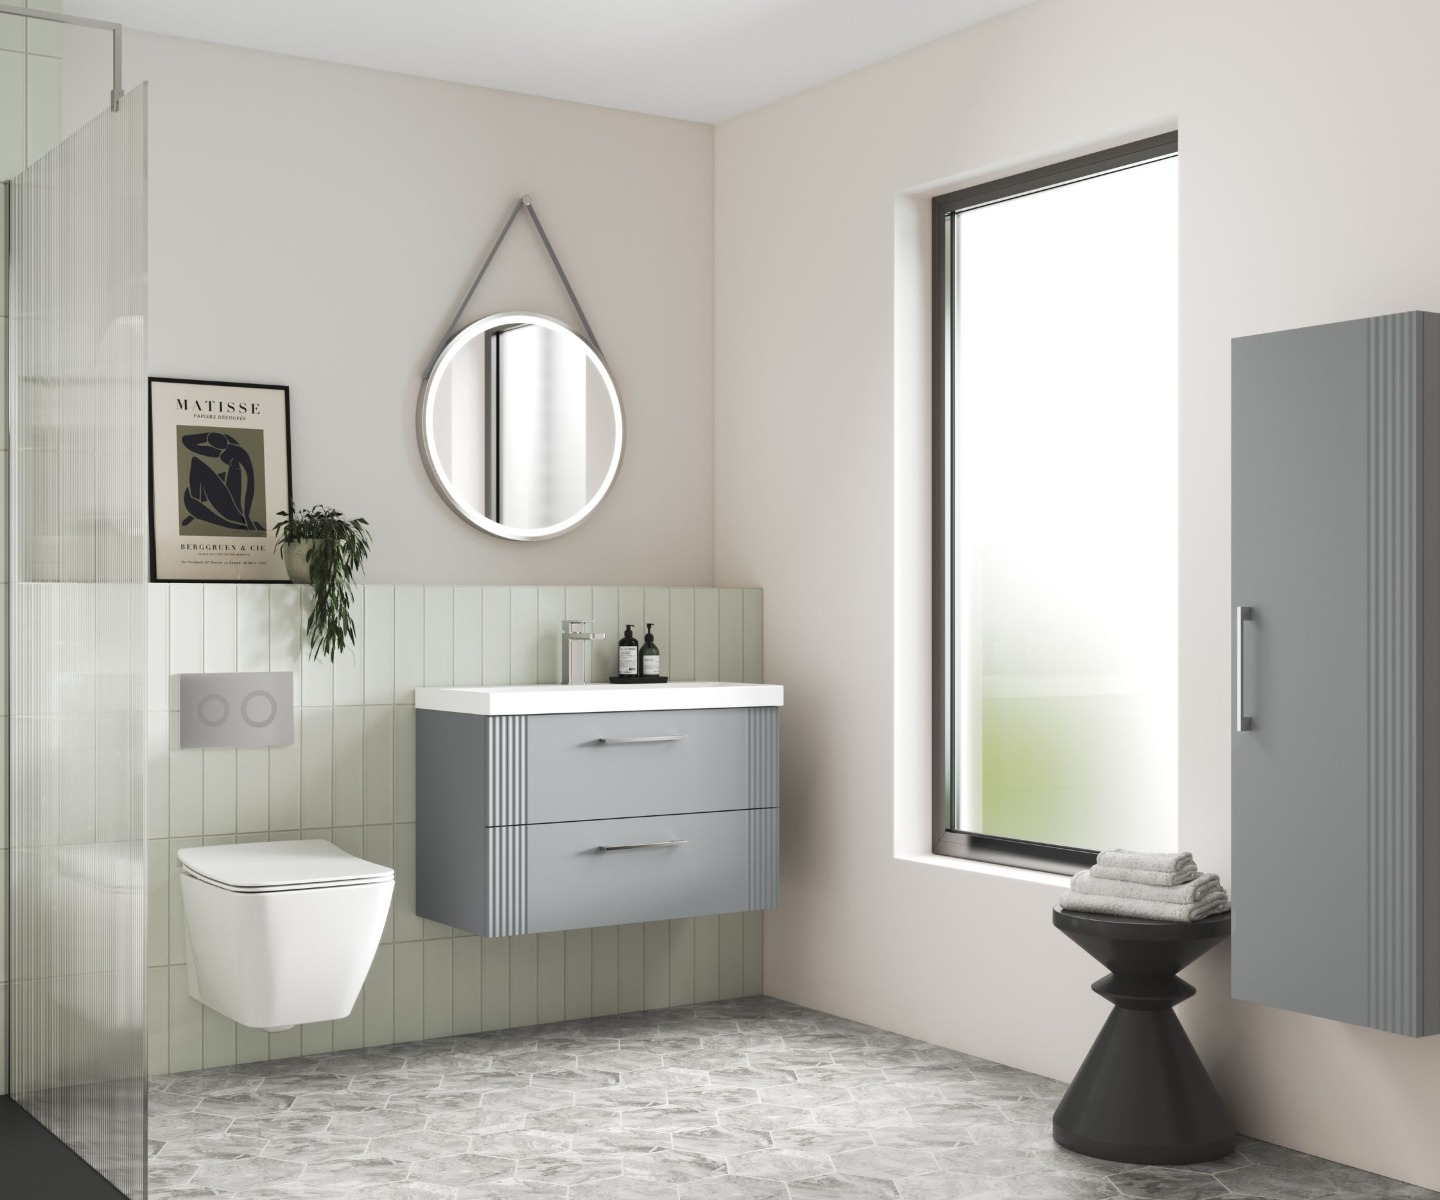 grey bathroom with toilet, basin and large window